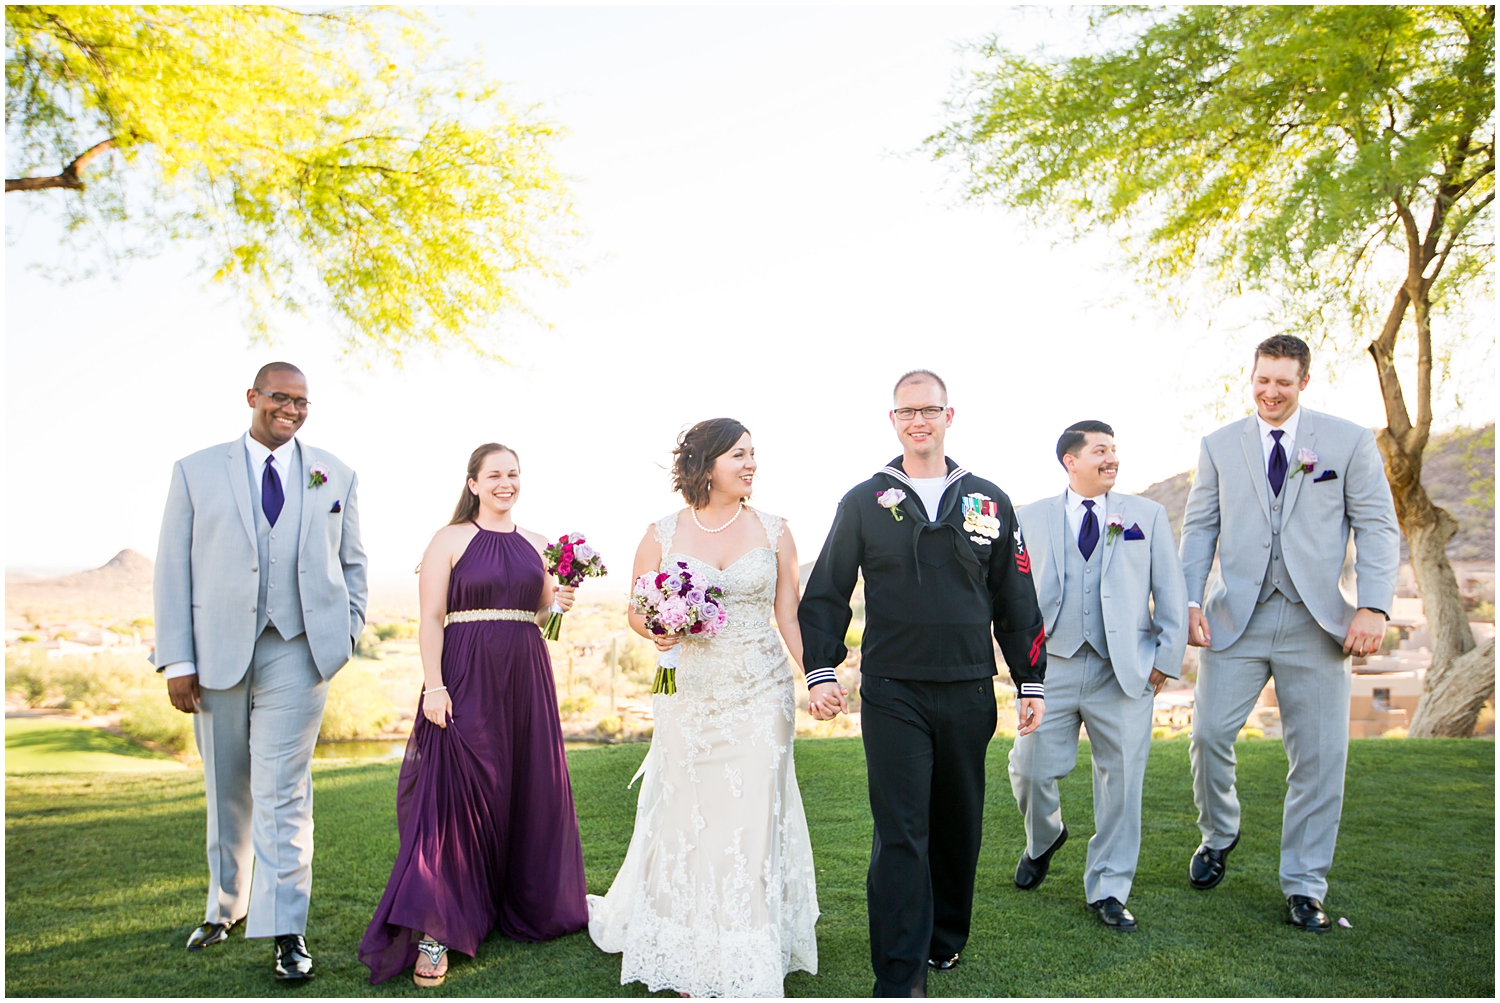 bride in strapless dress with veil and purple lavender peony and rose bouquet with bridesmaid in dark purple maxi dress and bridesman in light grey suit with Groom in Navy dress uniform with groomsmen in light grey suits and purple tie on wedding day wedding party group shot